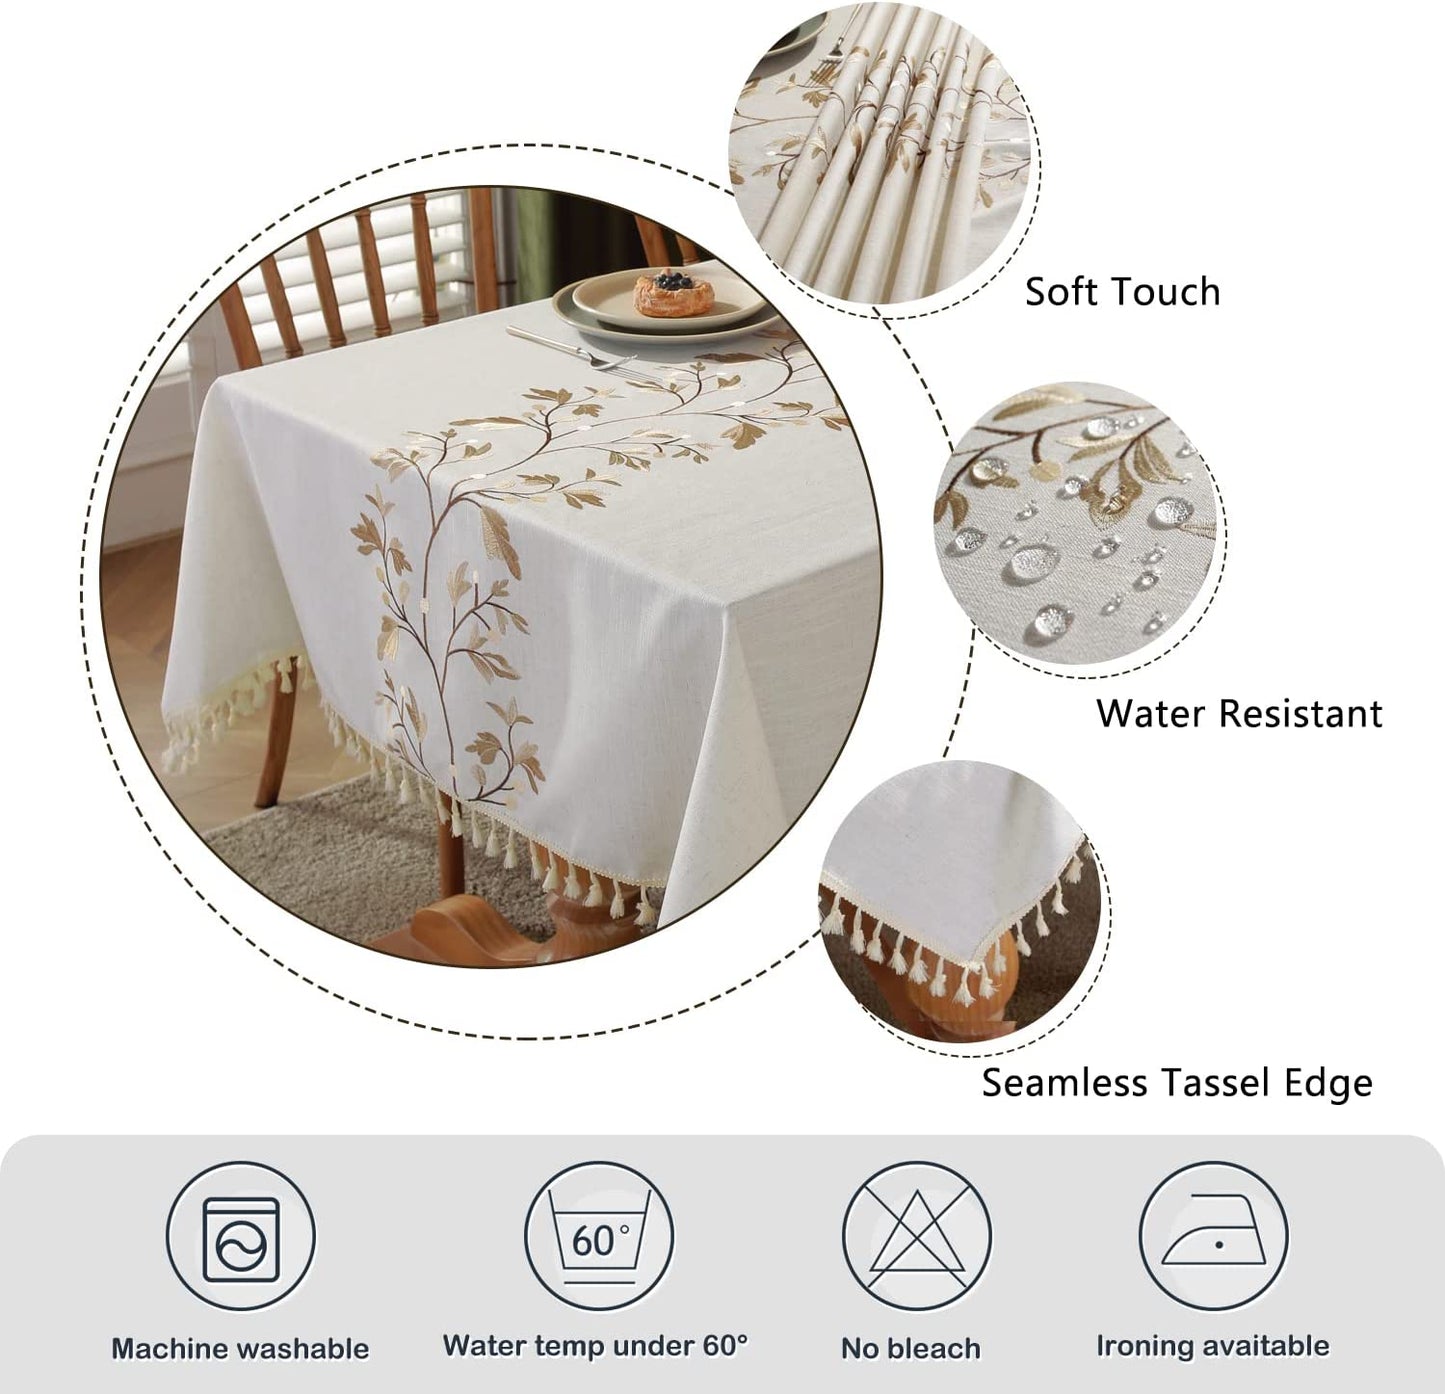 Cotton Linen Waterproof Tablecloth for Dining Table Farmhouse Kitchen Rectangle Table Cloth Coffee Wrinkle Free Table Cover, Beige, Coffee Flower, 55X55 Inch